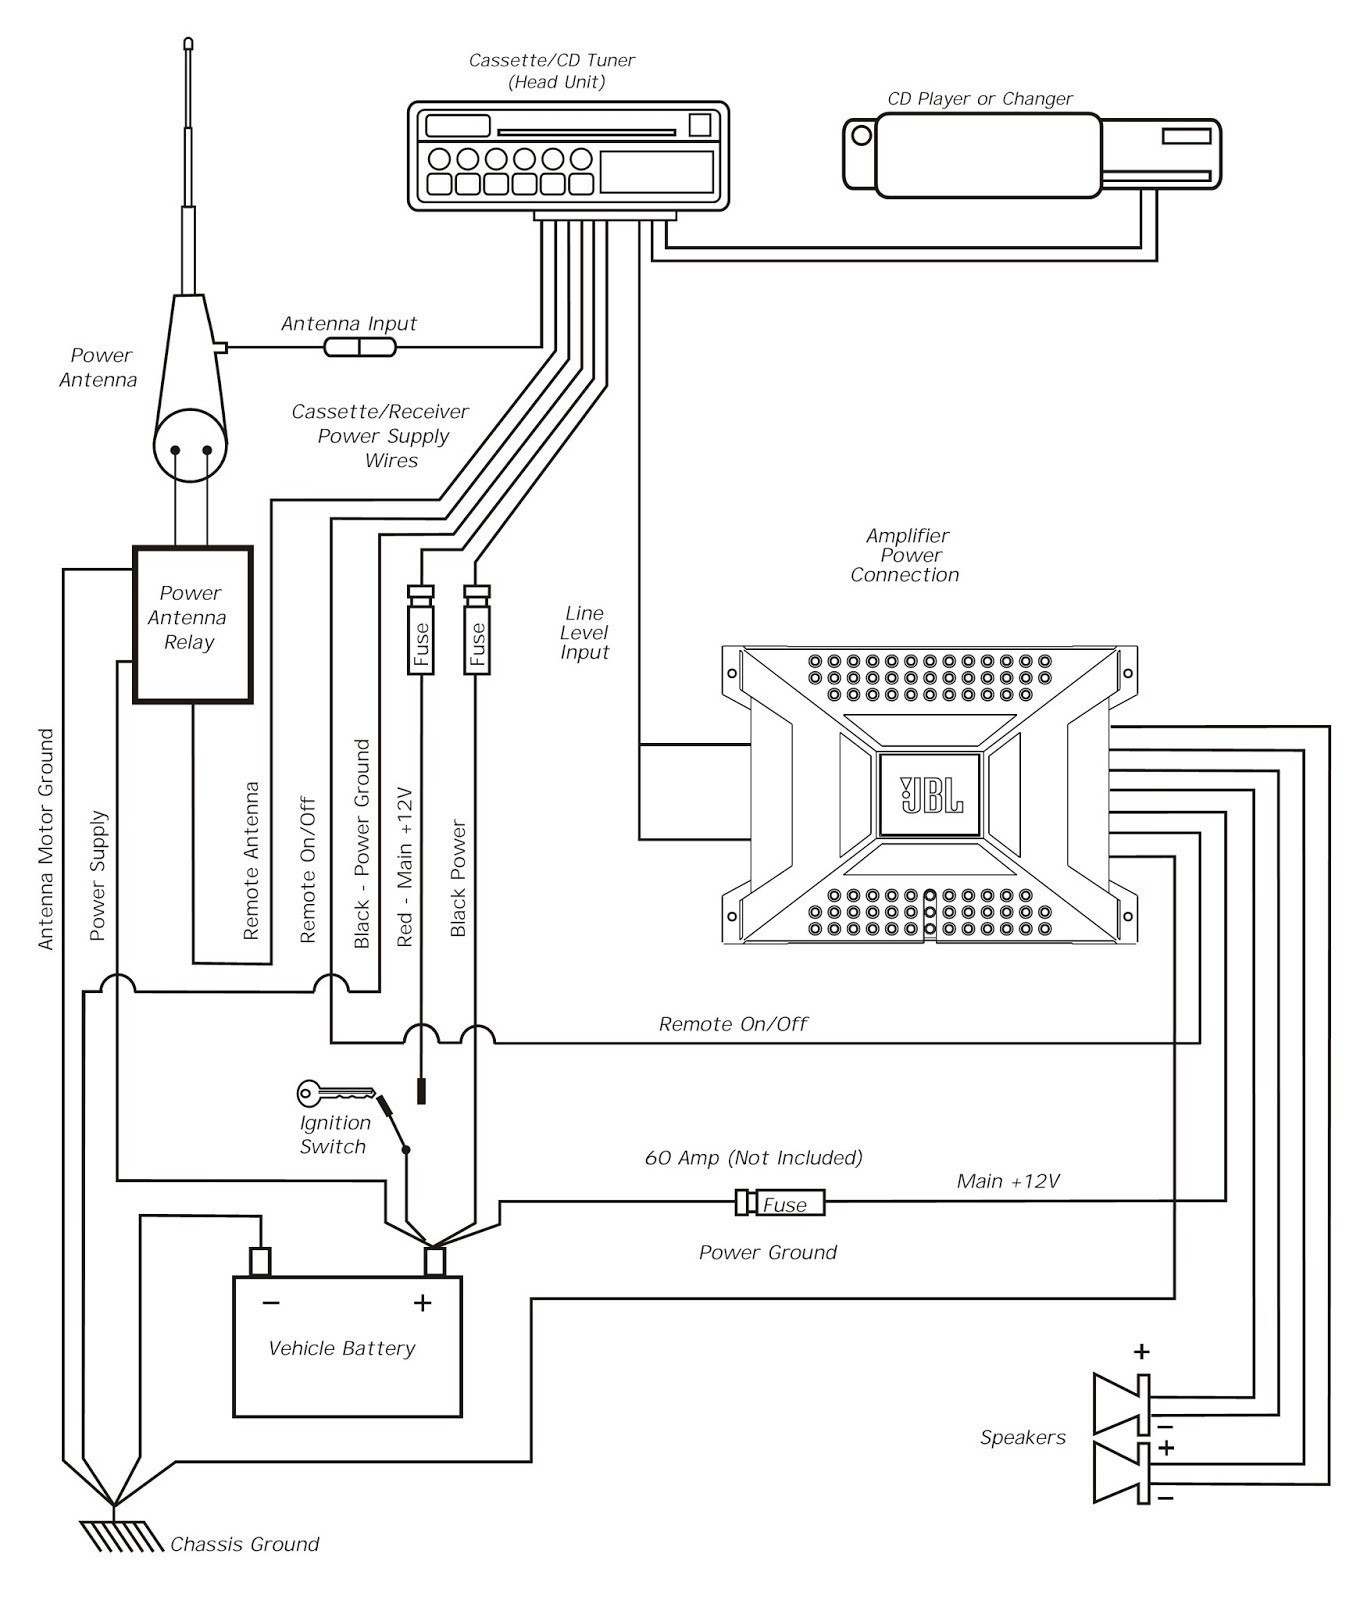 Home theatre Wiring Diagram Wiring Diagram Zr 550 Archives Feefee New Wiring Diagram for Of Home theatre Wiring Diagram